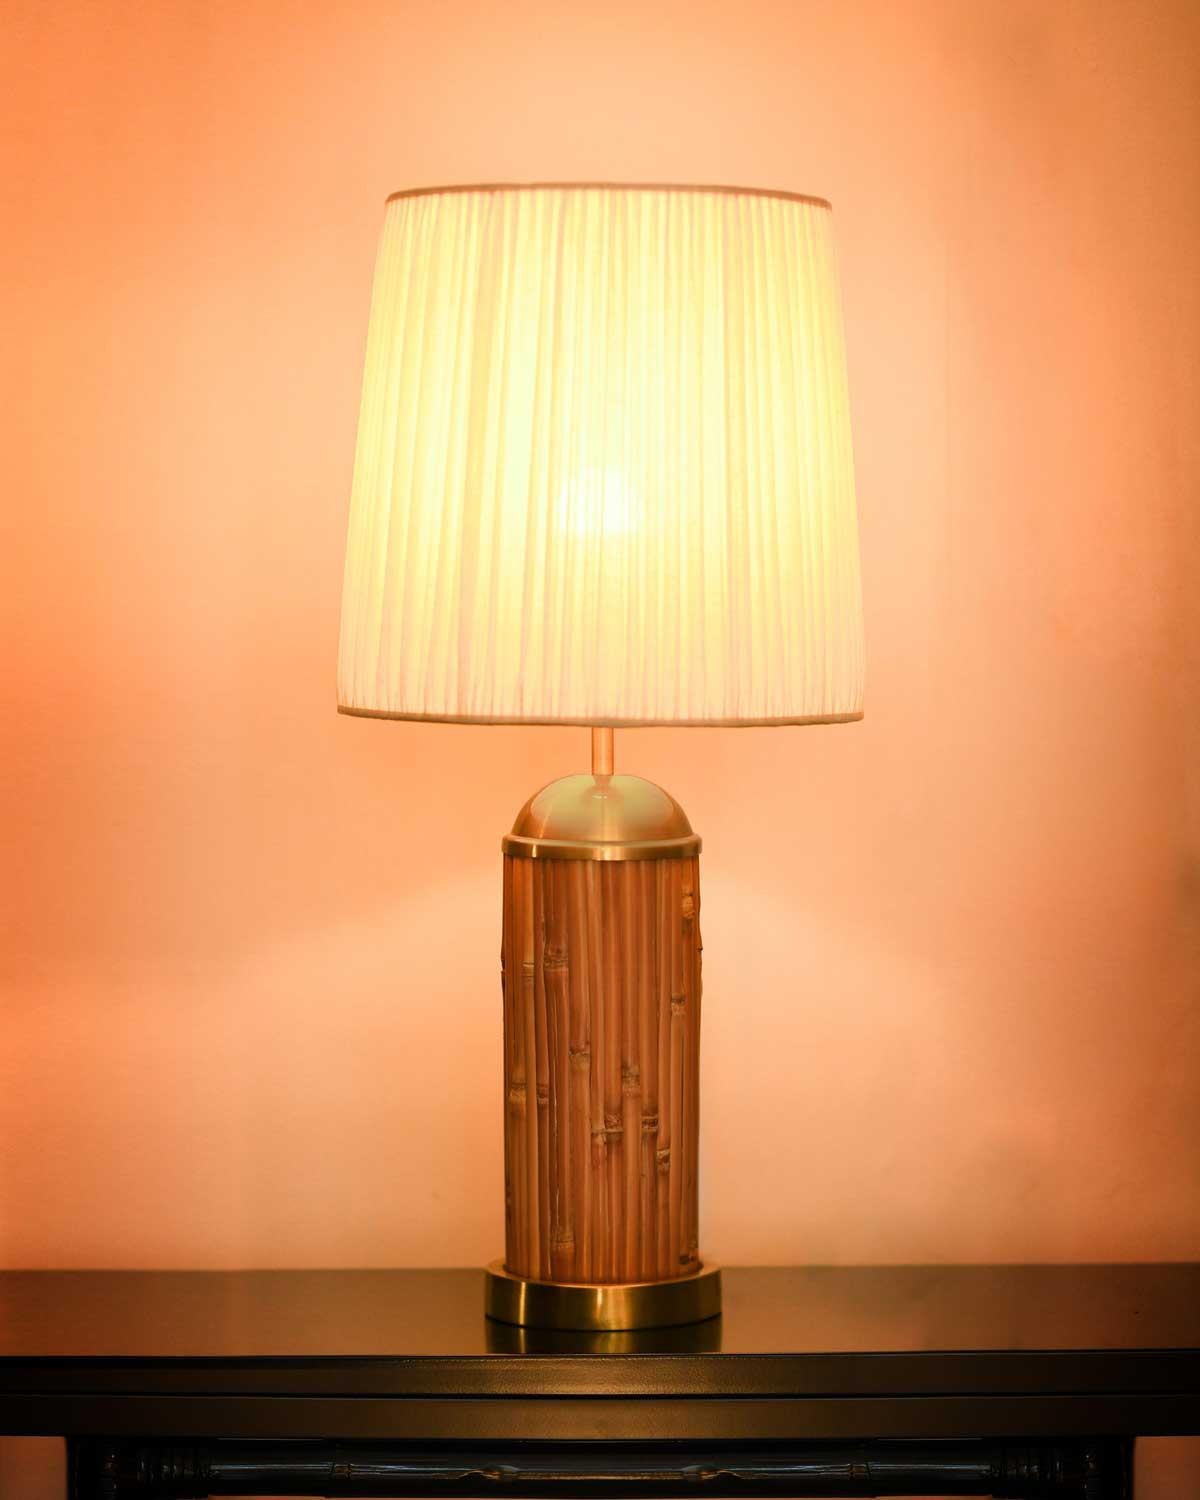 Table lamp in rattan and brass from the 70s, complete with fabric lampshade
Product details
Dimensions: 77 h x 37 diam cm
Materials: Rush, brass, fabric.